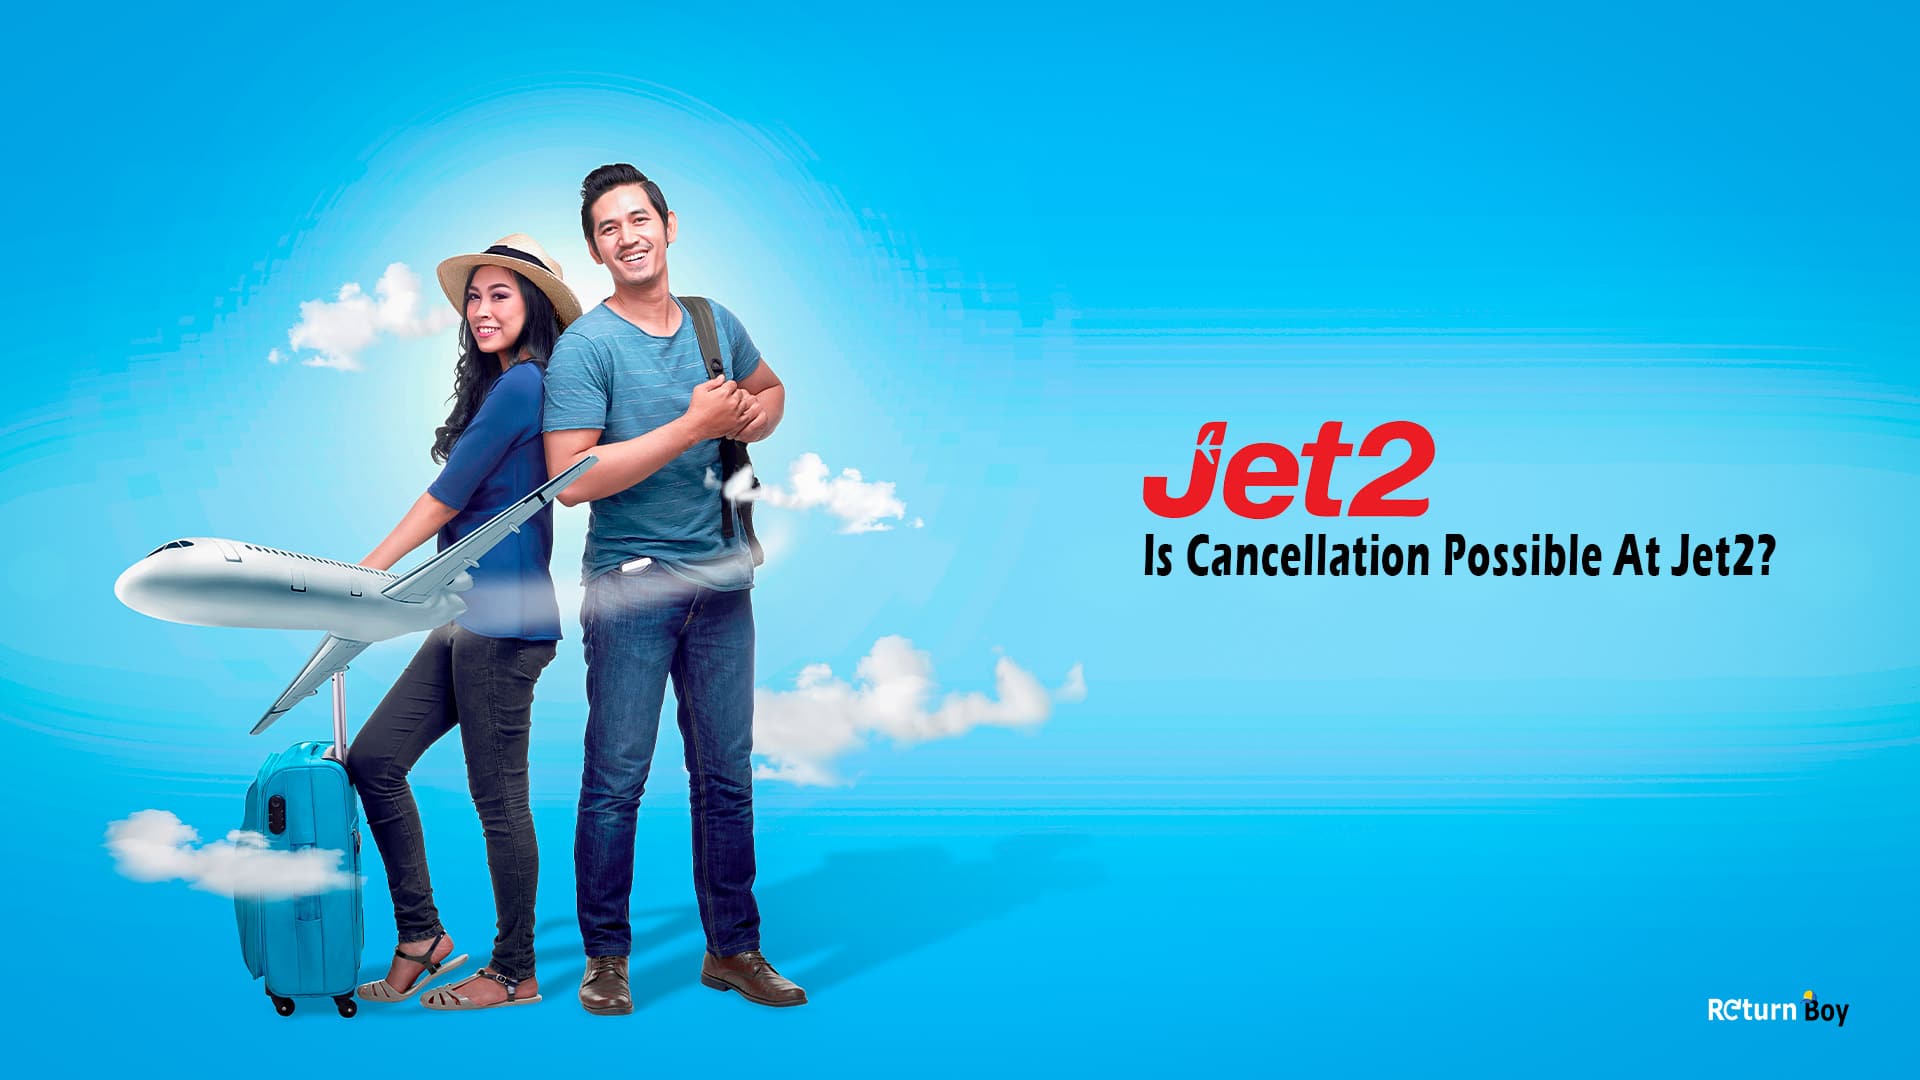 Jet2 Cancellation Policy